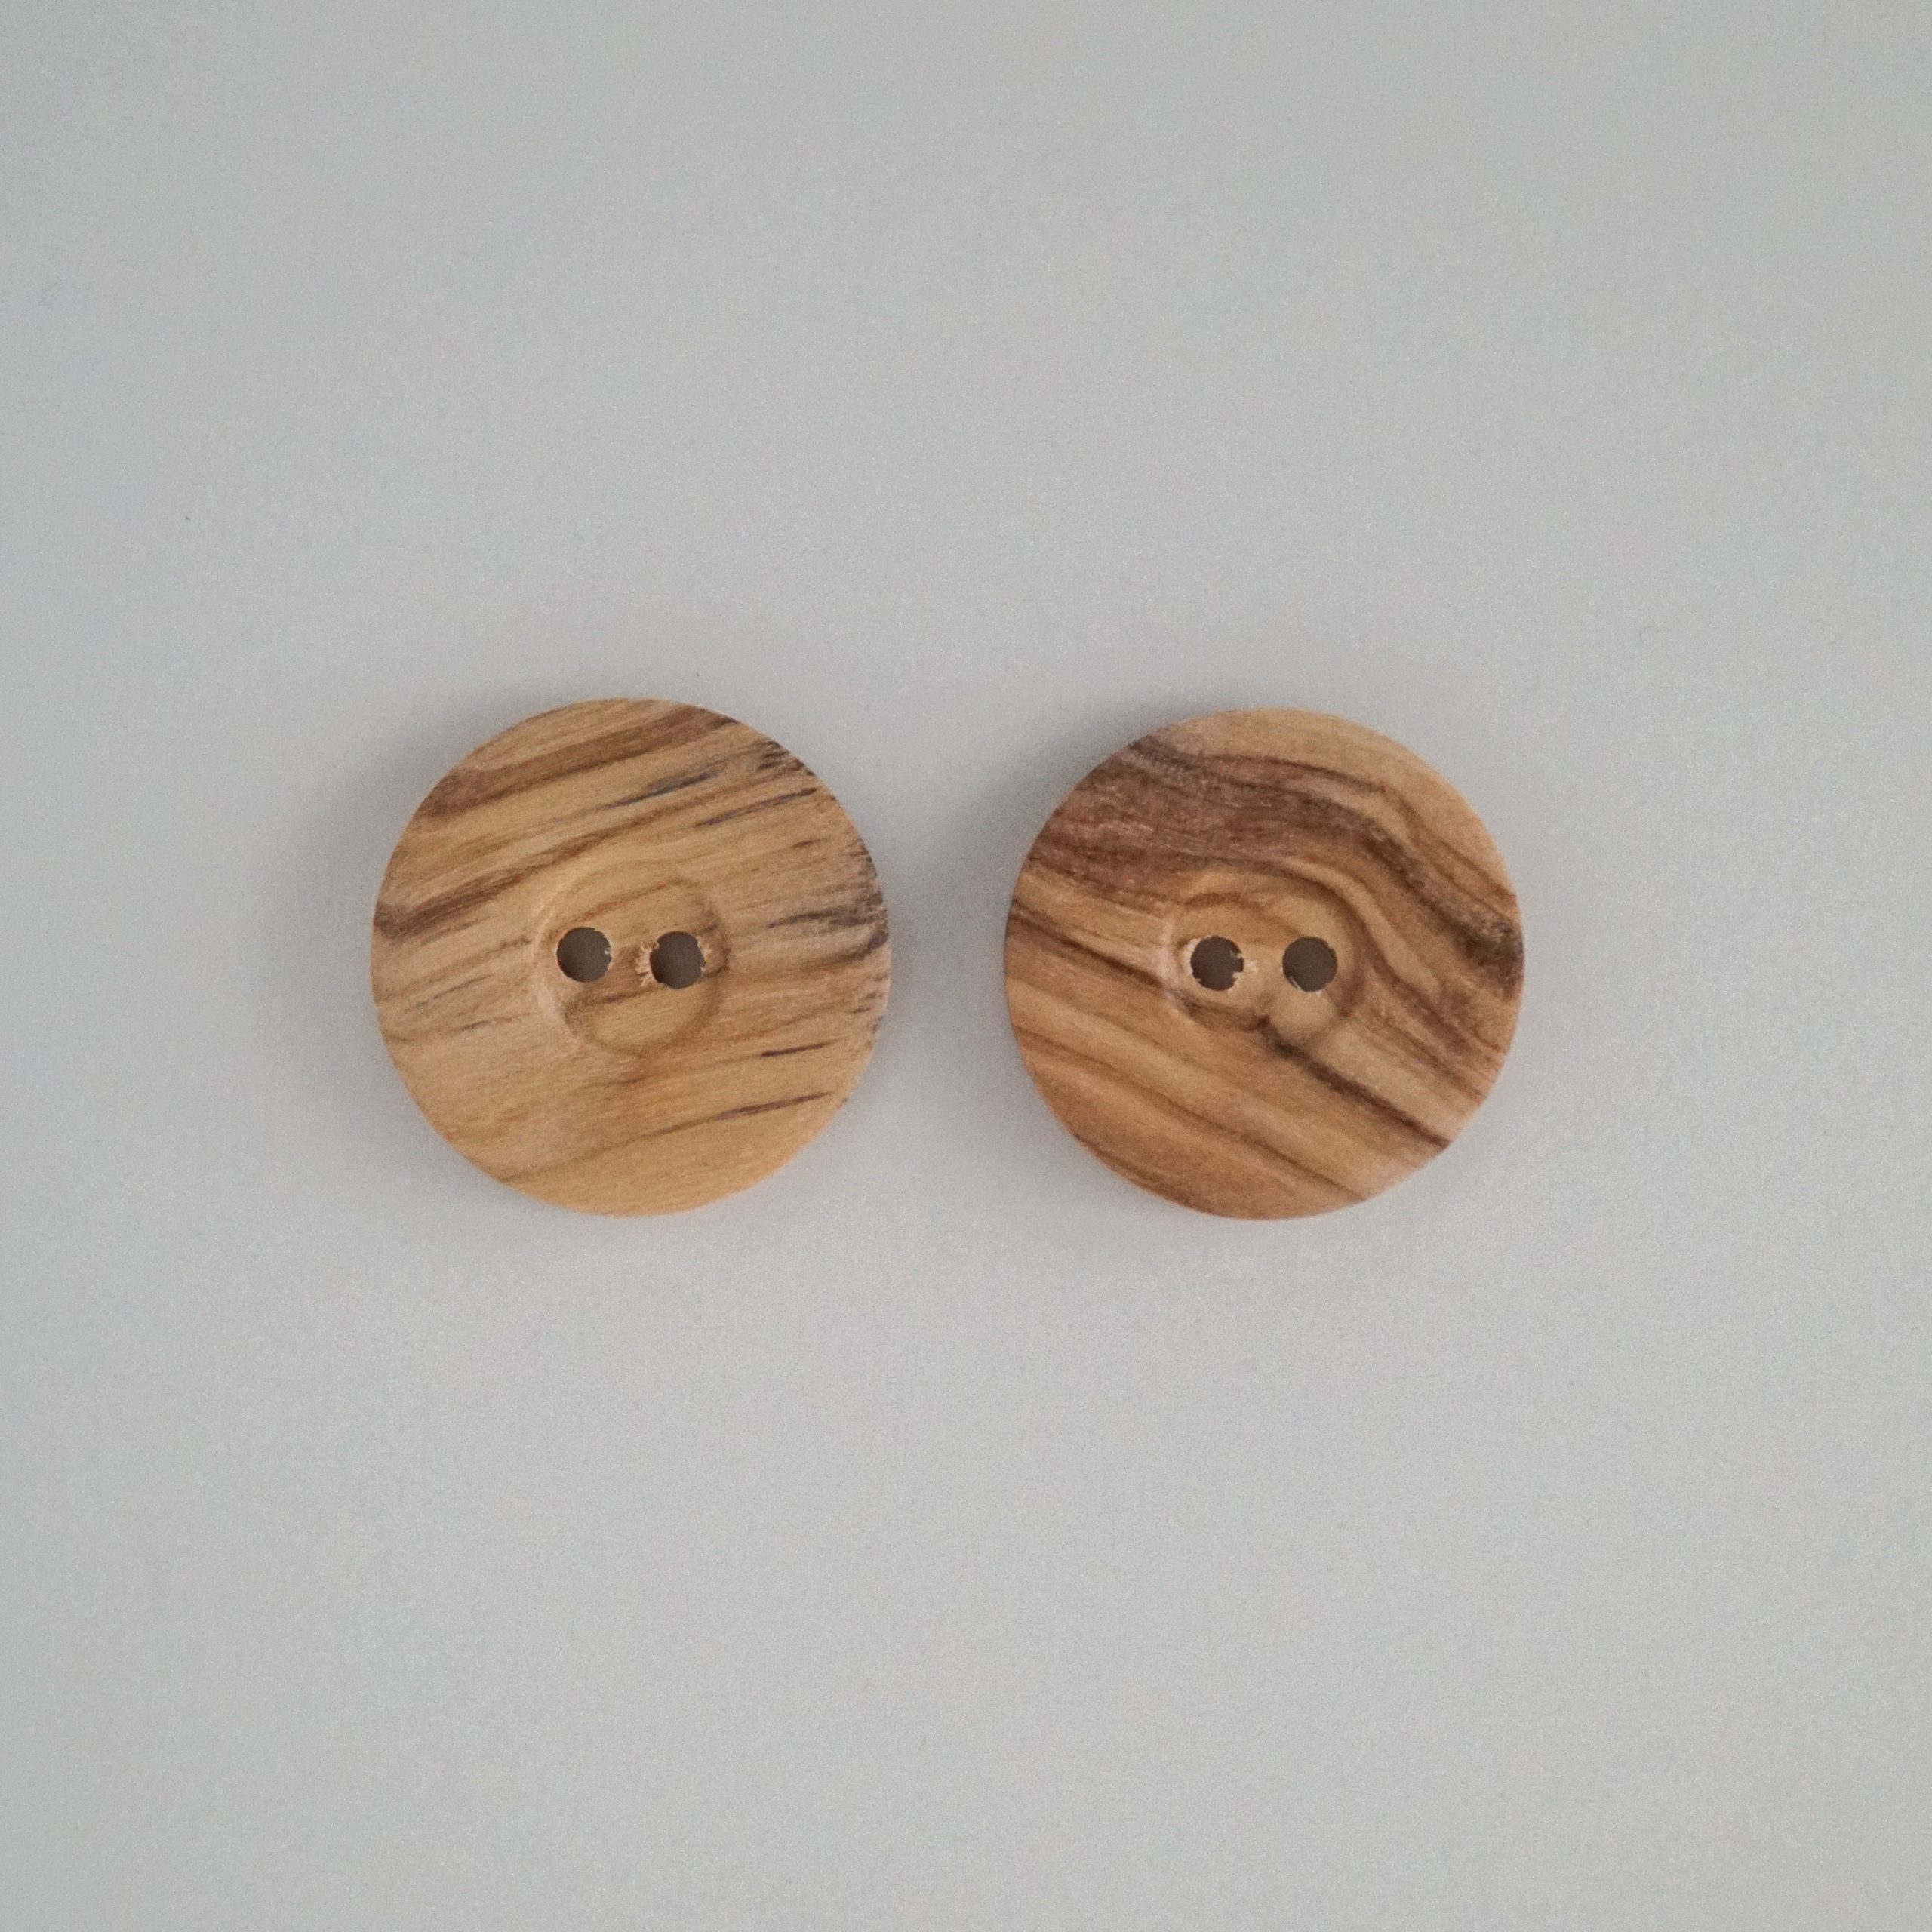 wood buttons knitting